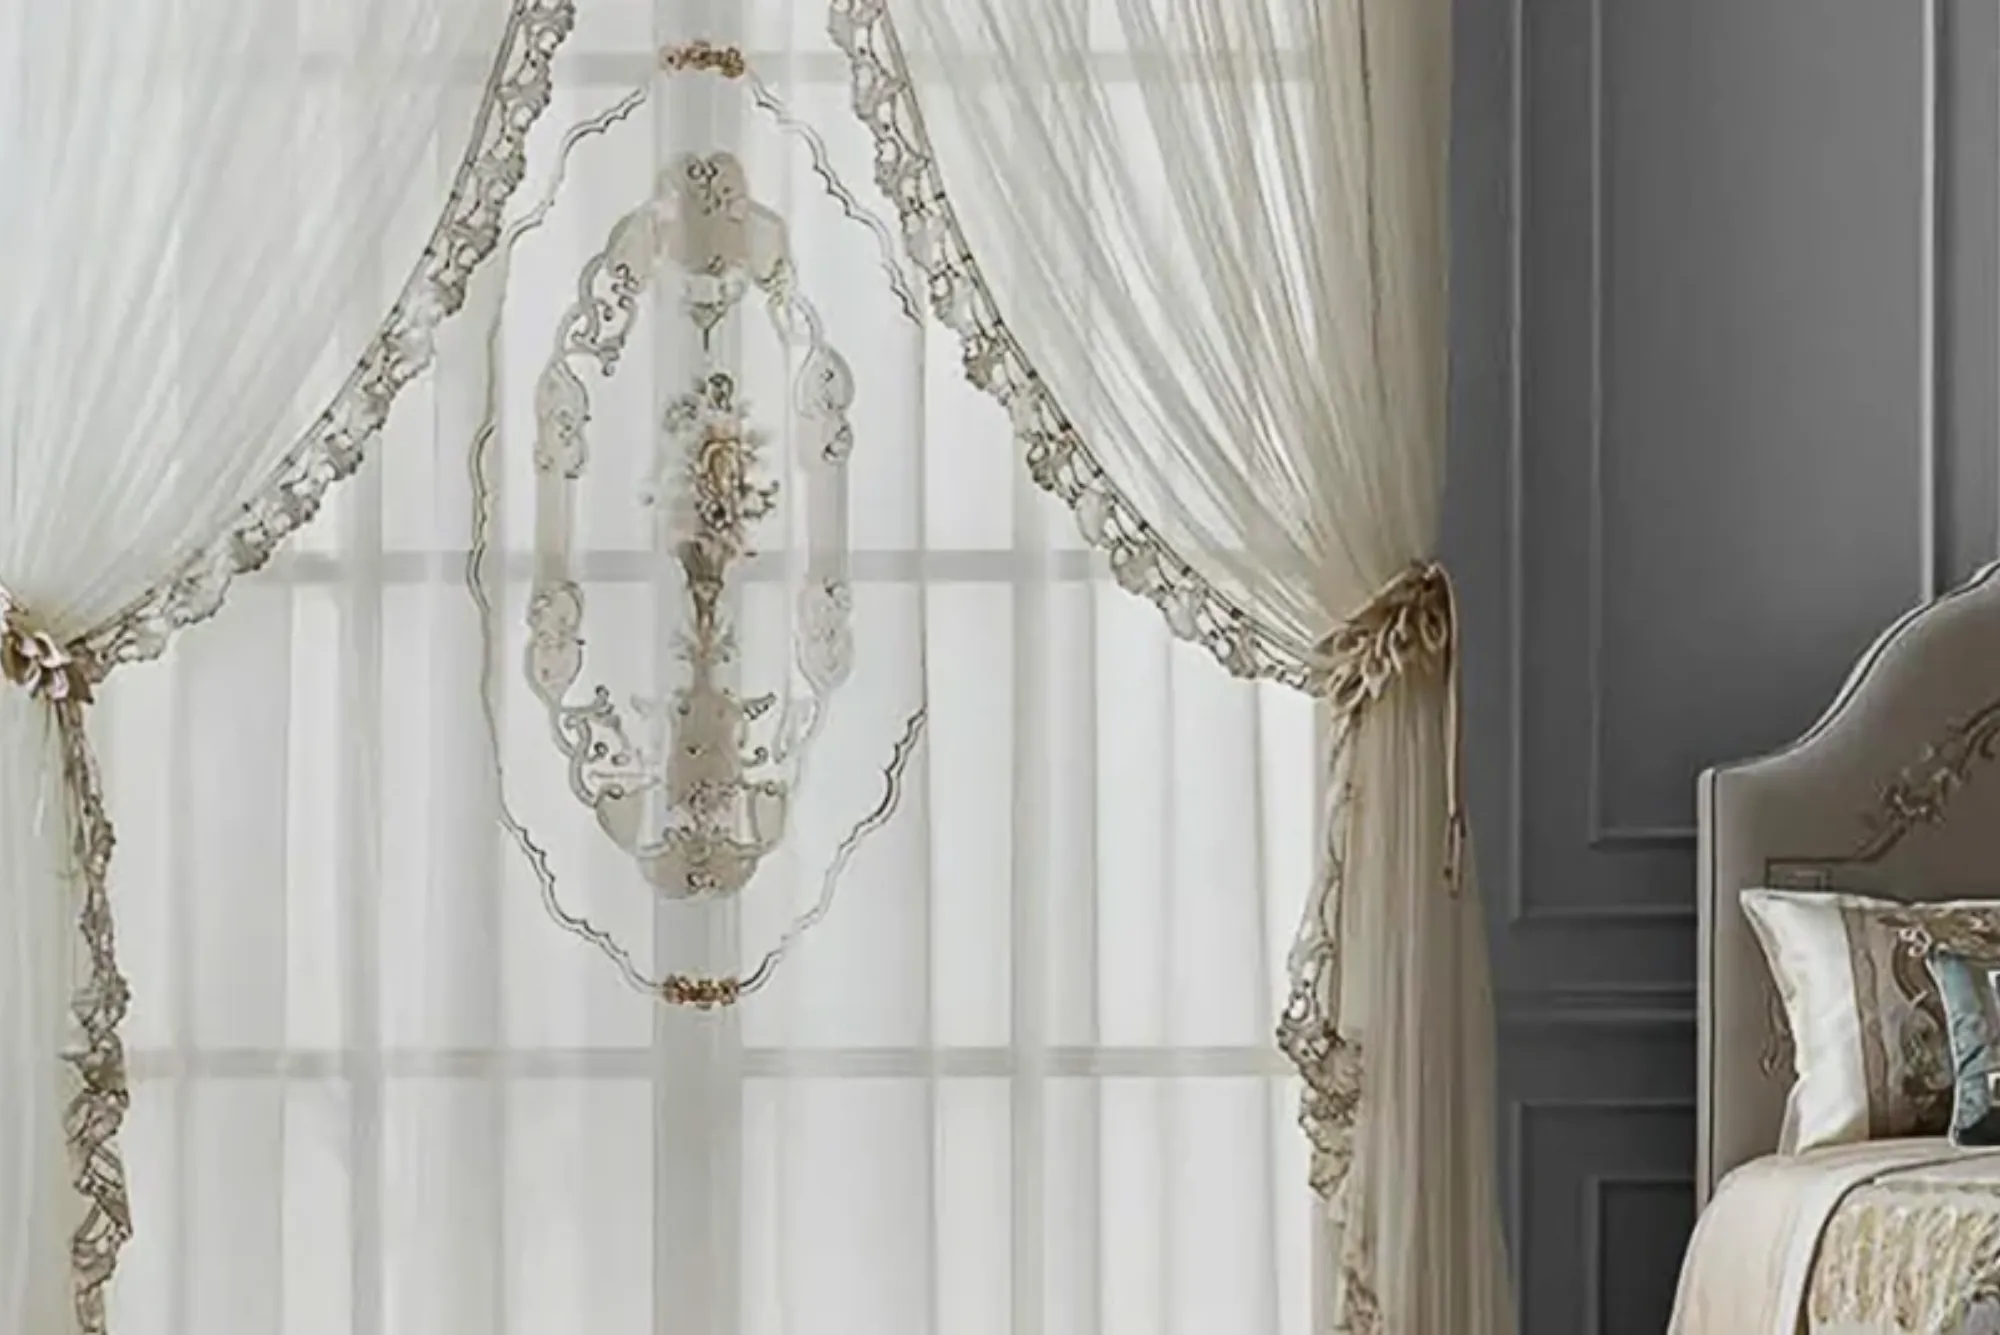 Transform Your Bedroom Into A Tranquil Refuge with Blackout Curtains In Dubai